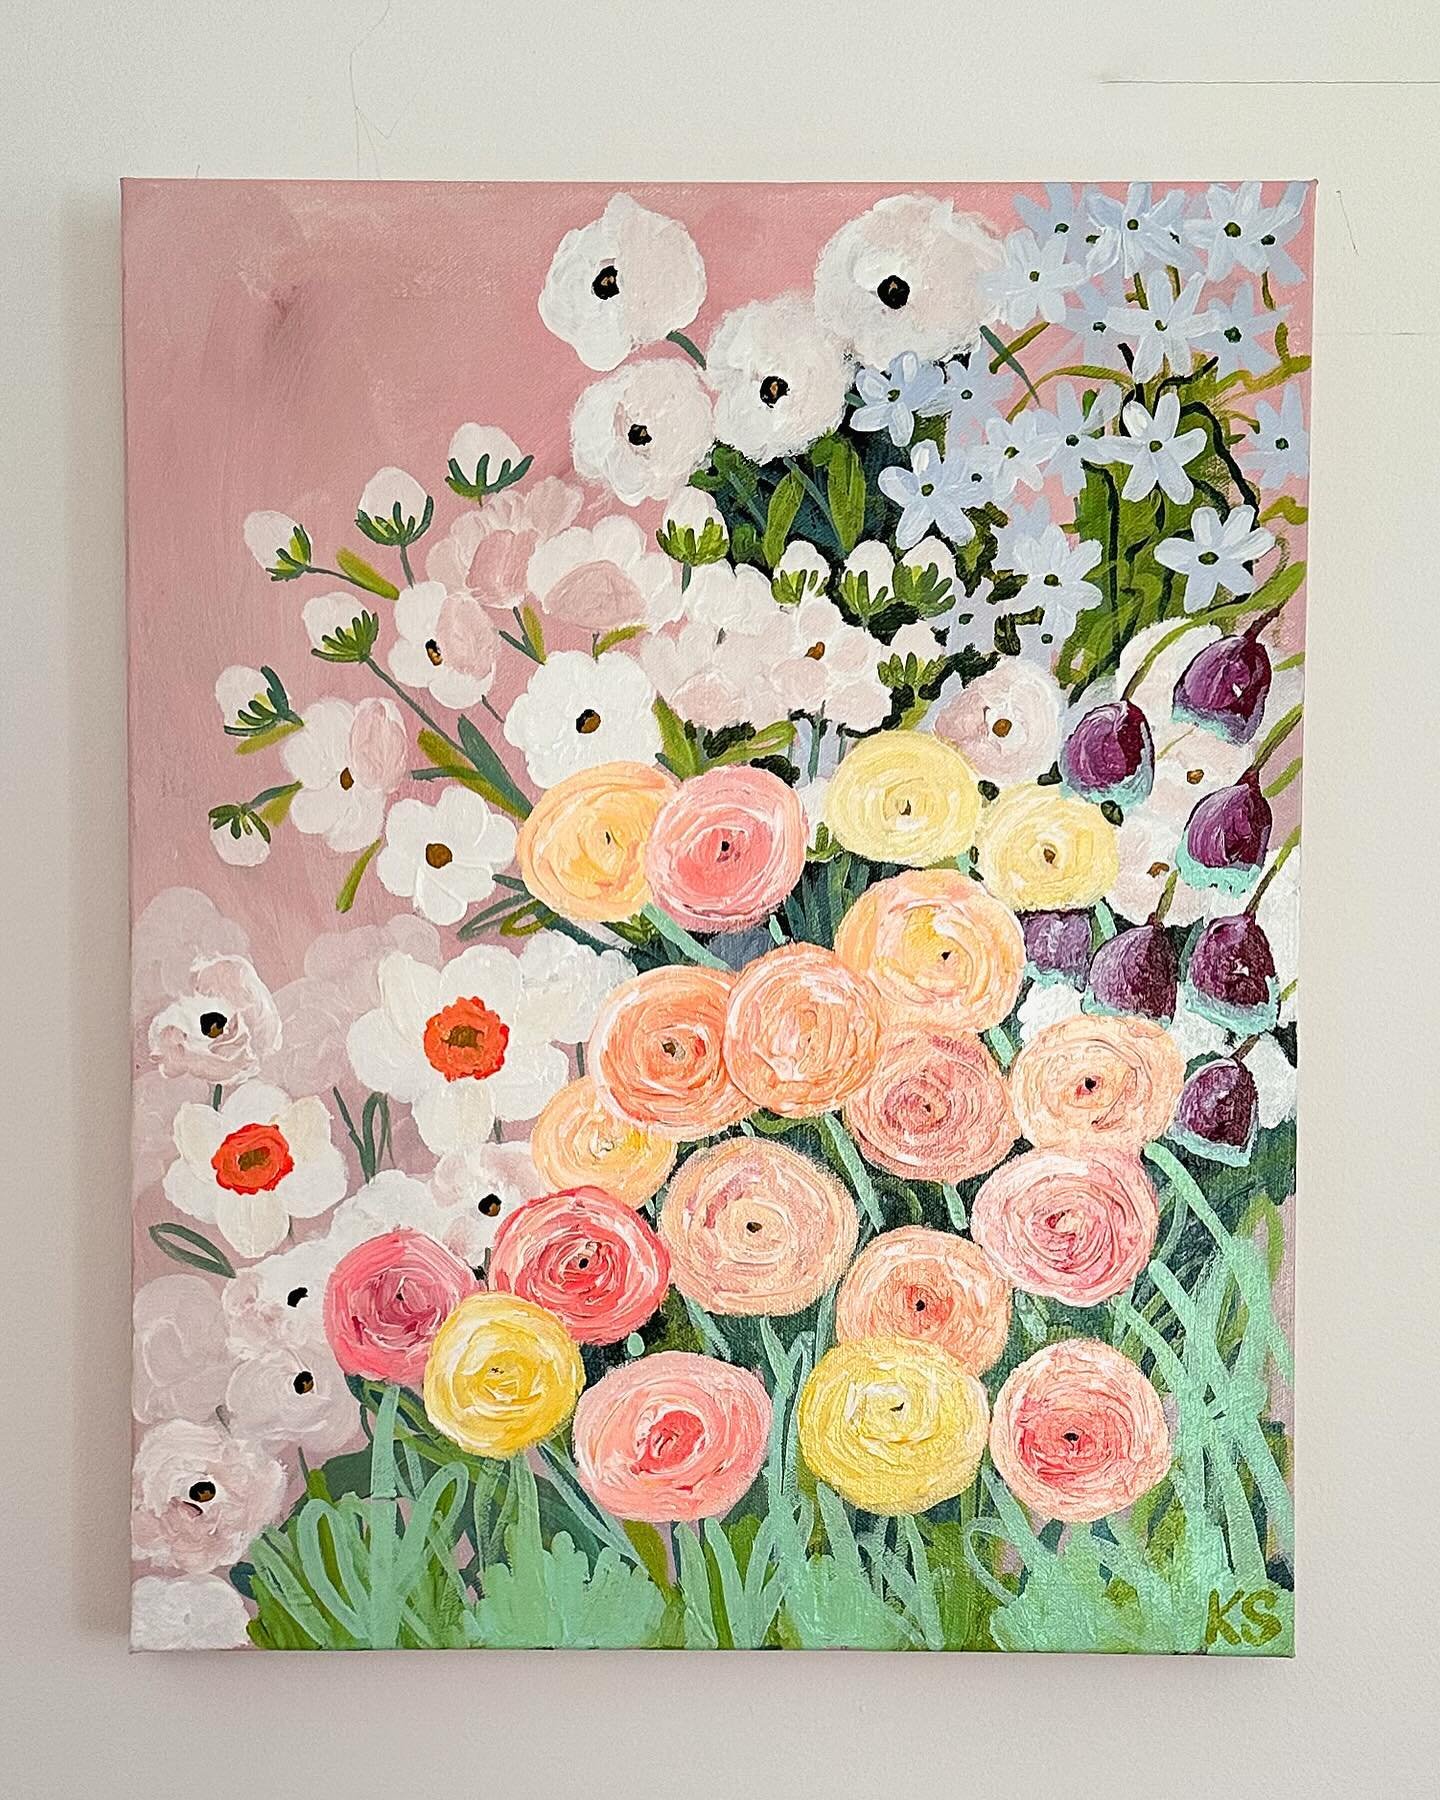 SUPERBLOOM Collection: Releasing May 14

This one is probably my favorite. It&rsquo;s so hard to choose. Swipe to get close up and see all the juicy texture and fun colors on this canvas. 

16x20 x 1.5 deep
Unframed 

Releasing May 14 to email subscr